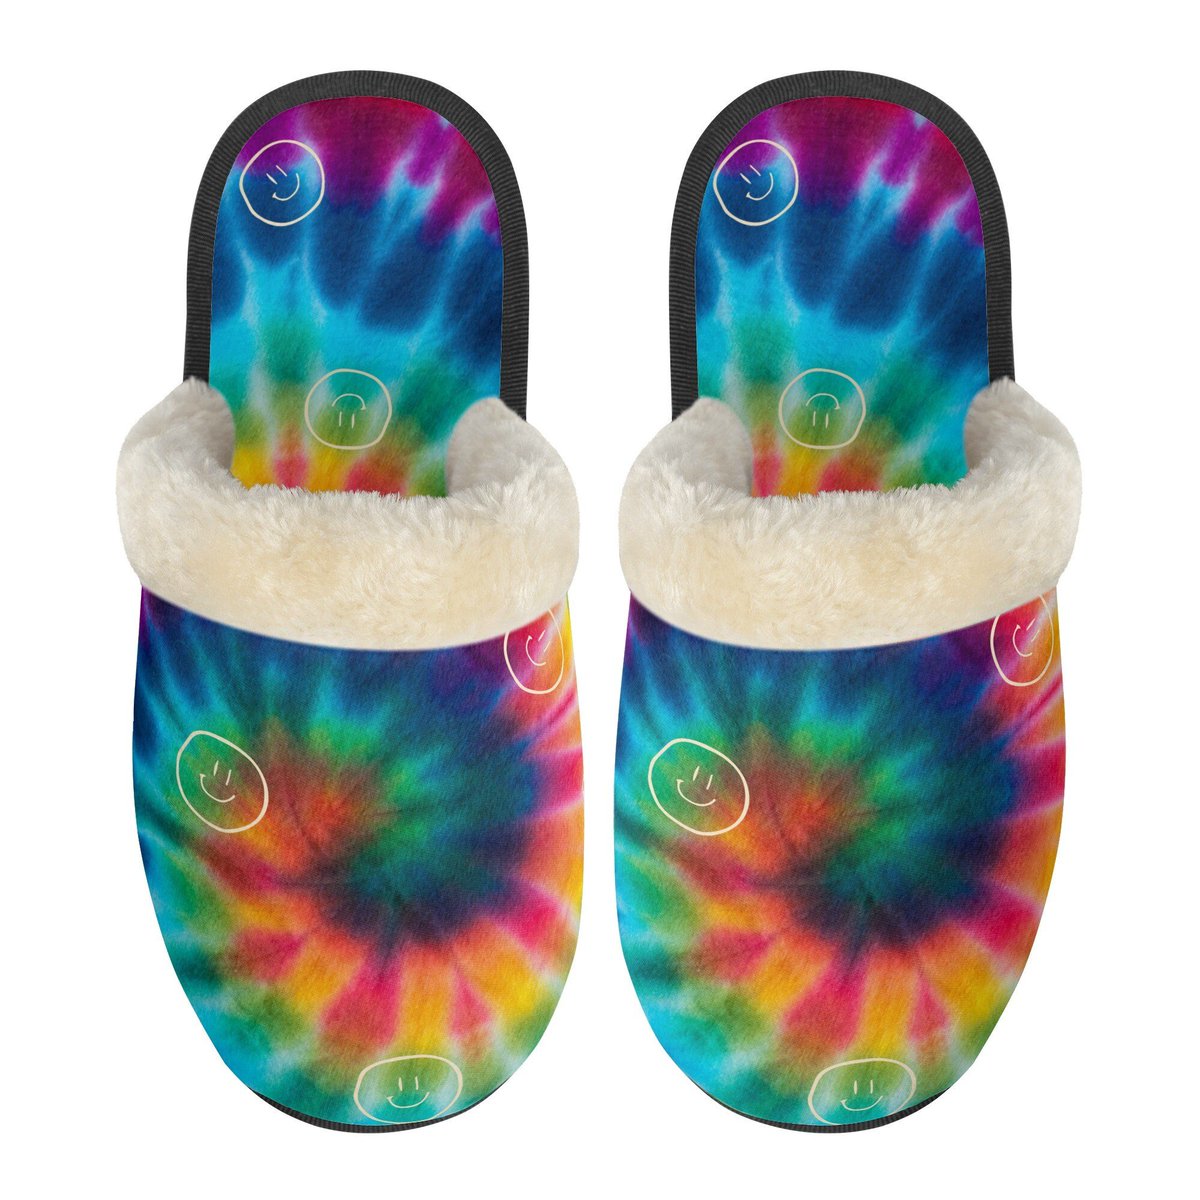 Excited to share the latest addition to my #etsy shop: Tie-Dye Unisex Non Slip EVA Warm Slippers #rainbow #nonslipslippers #tiedye #smiles #warmandcomfy #plushfabric #colorfulsandals #feet #womensslippers #bohohippie #slippers #Mensfashion
etsy.me/3EJoGai